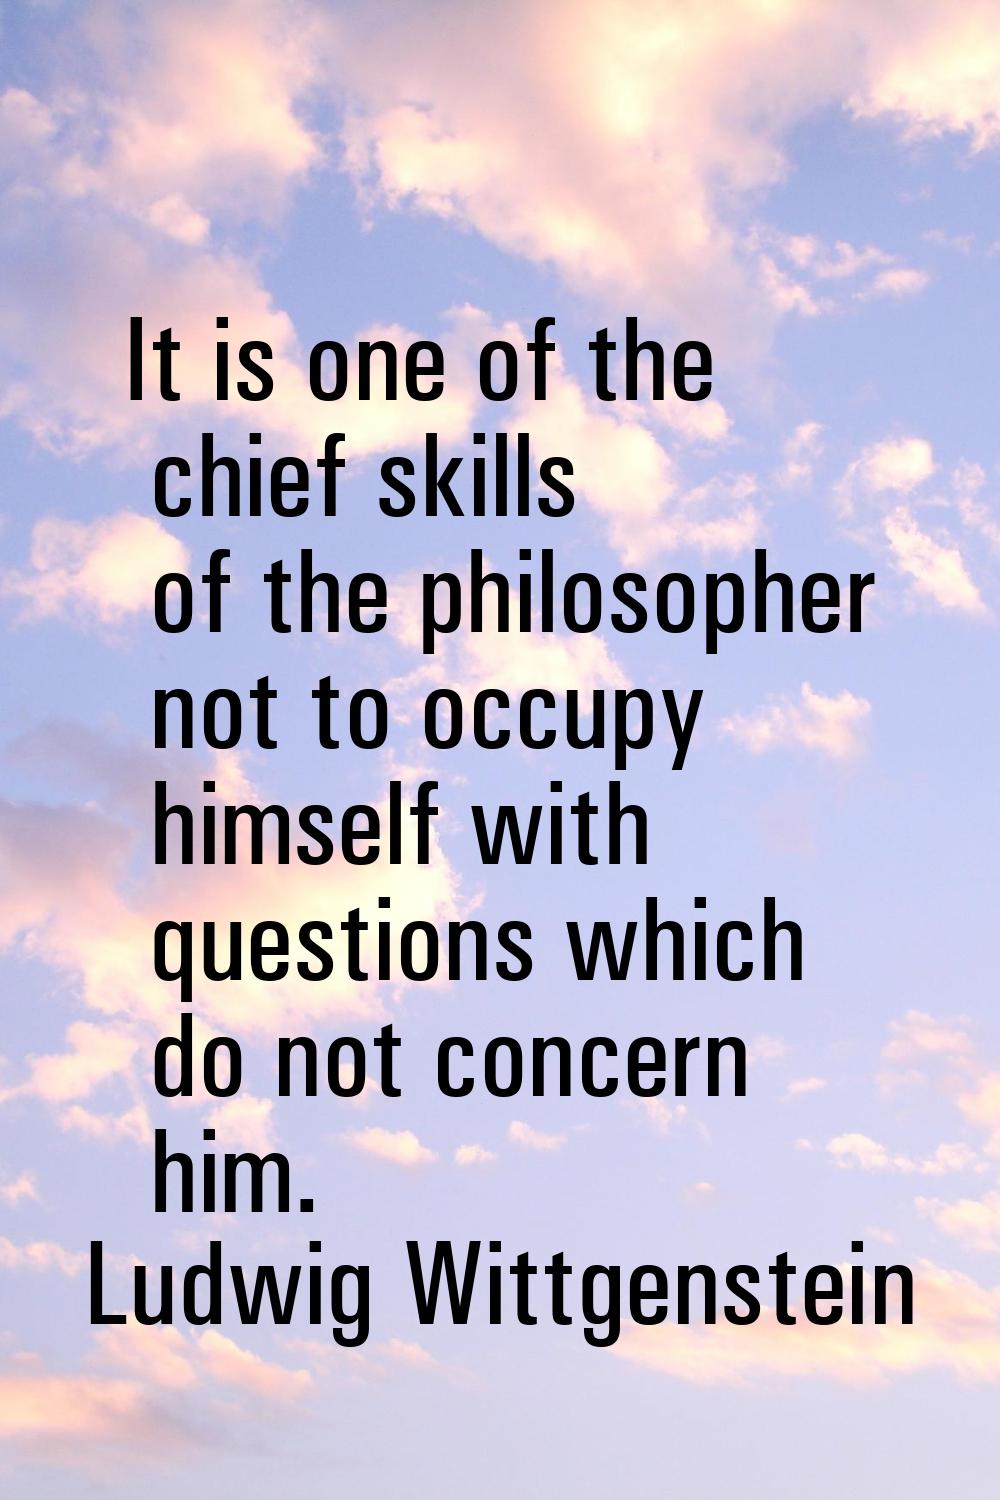 It is one of the chief skills of the philosopher not to occupy himself with questions which do not 